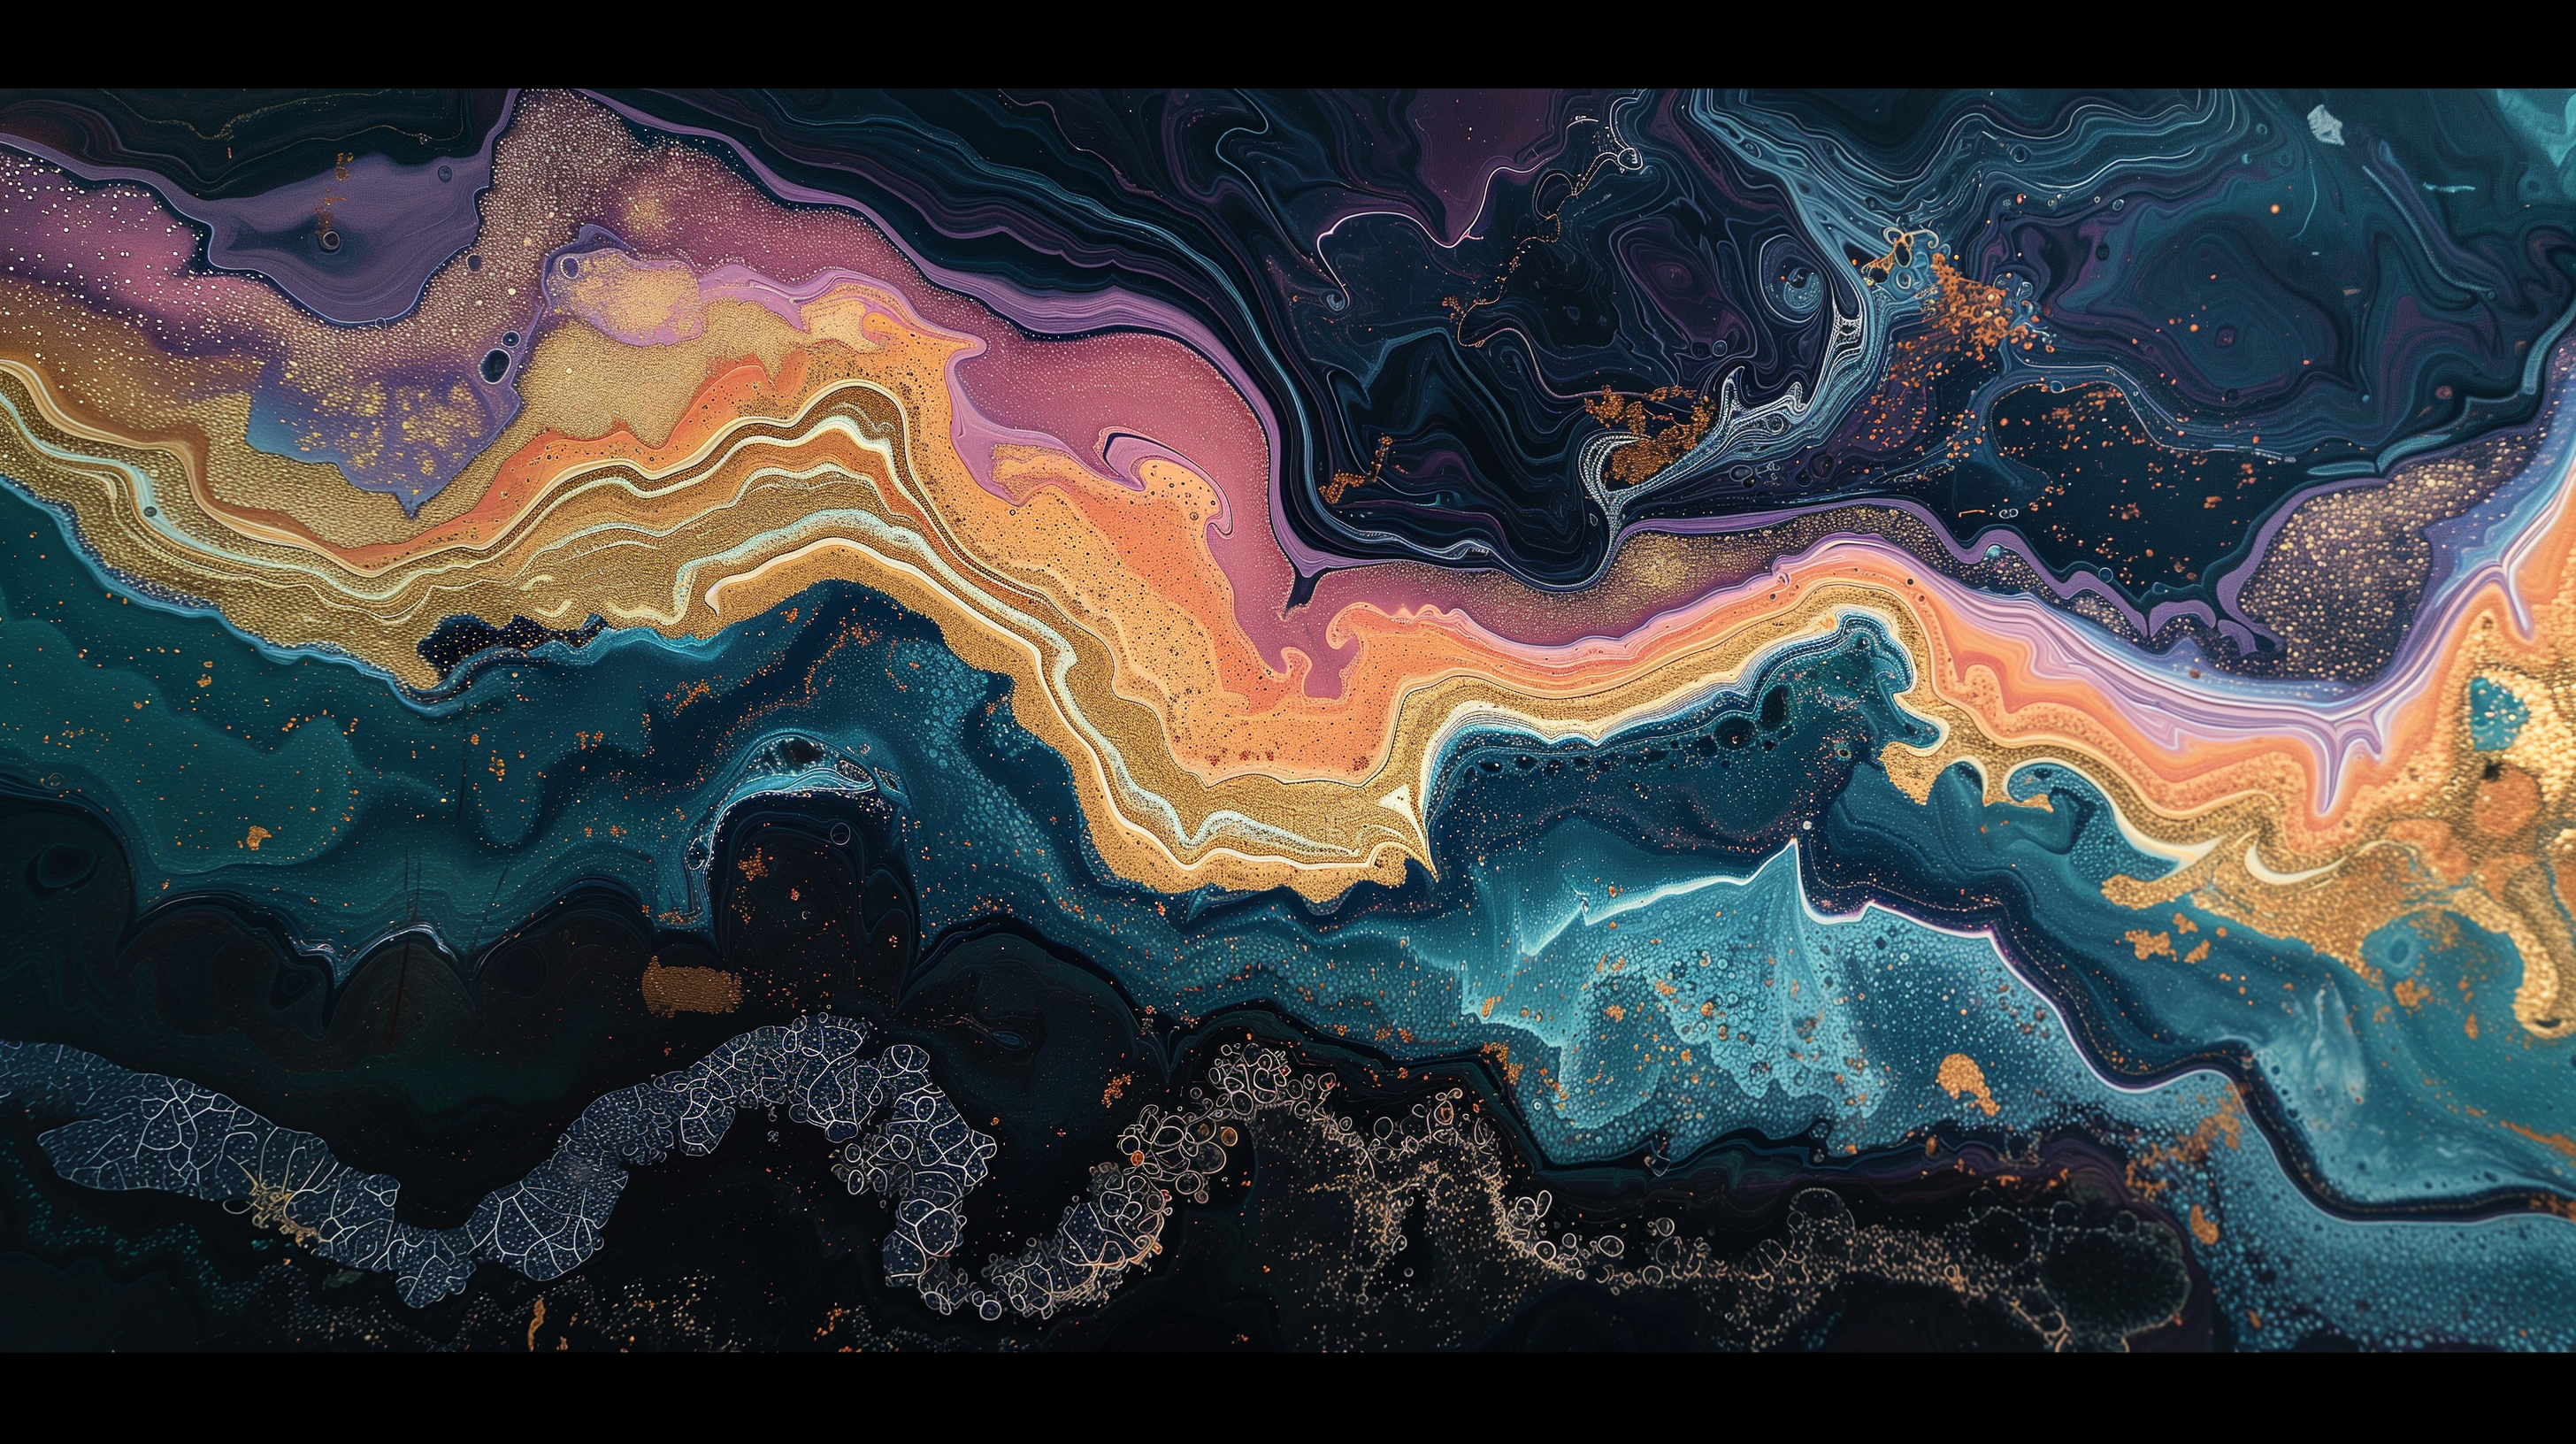 HD desktop wallpaper featuring colorful geode patterns with vibrant abstract designs for a beautiful background.